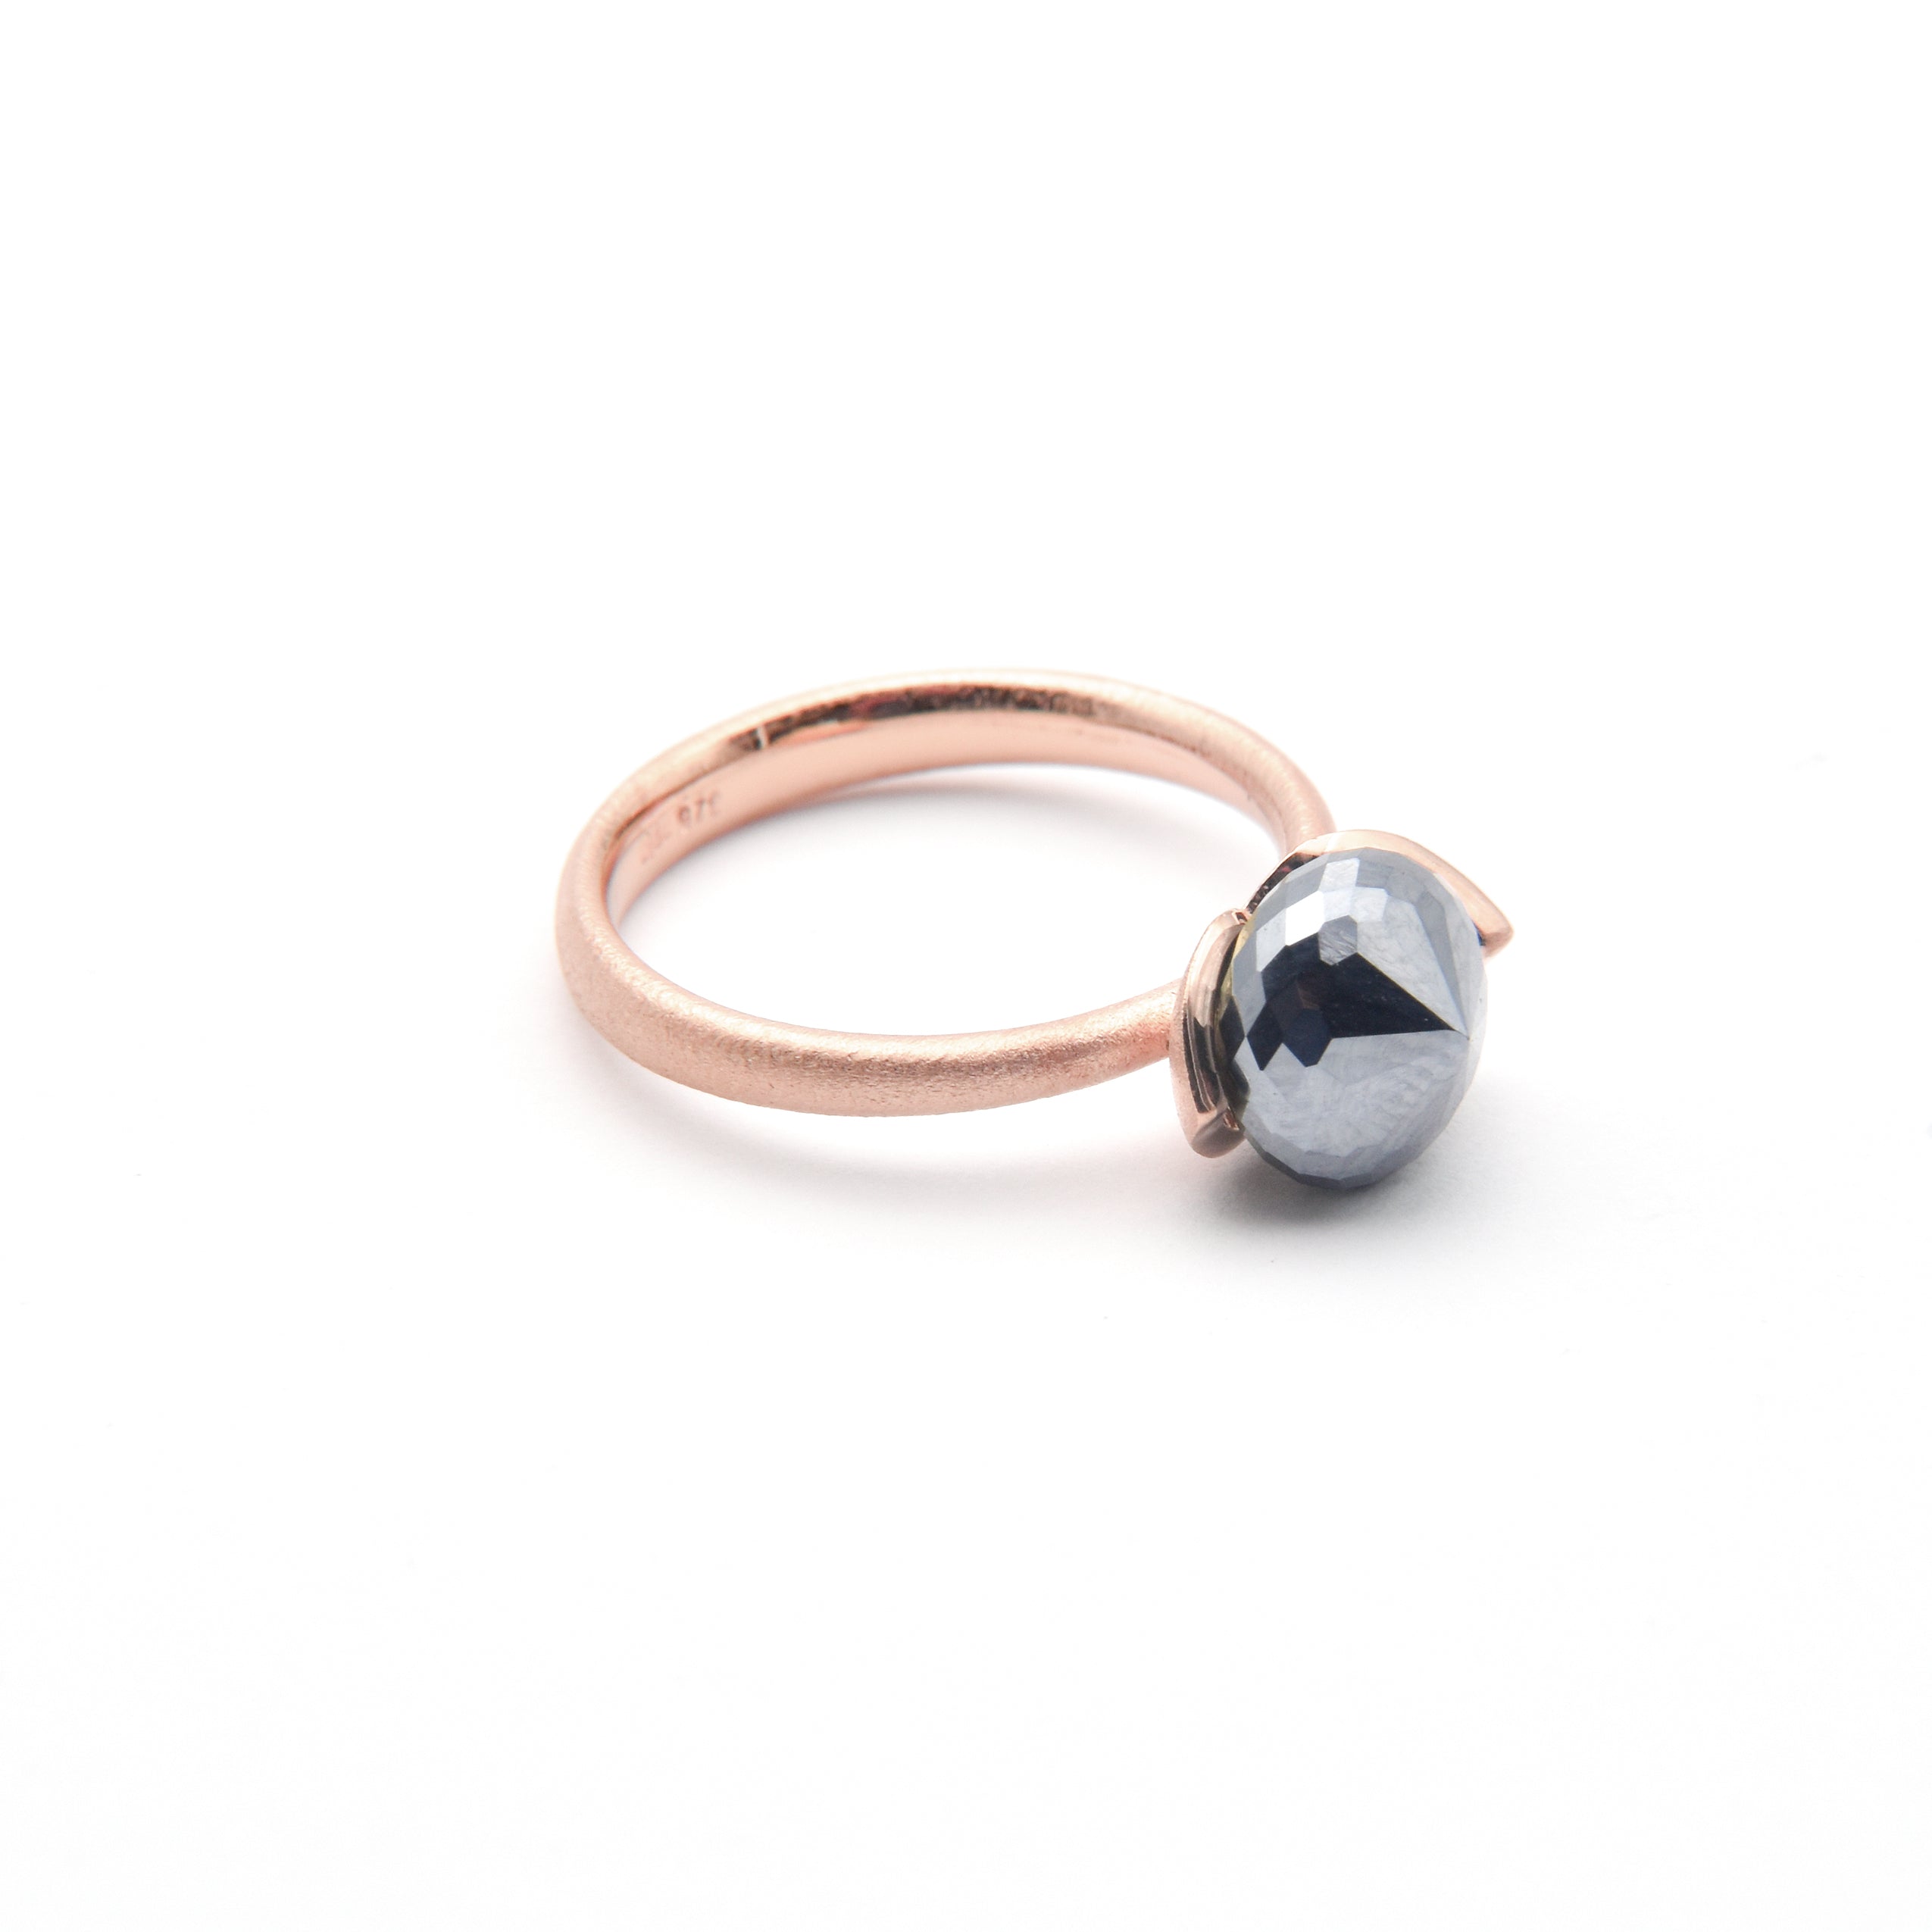 Dolce ring "smal" with hematite rec. 925/-